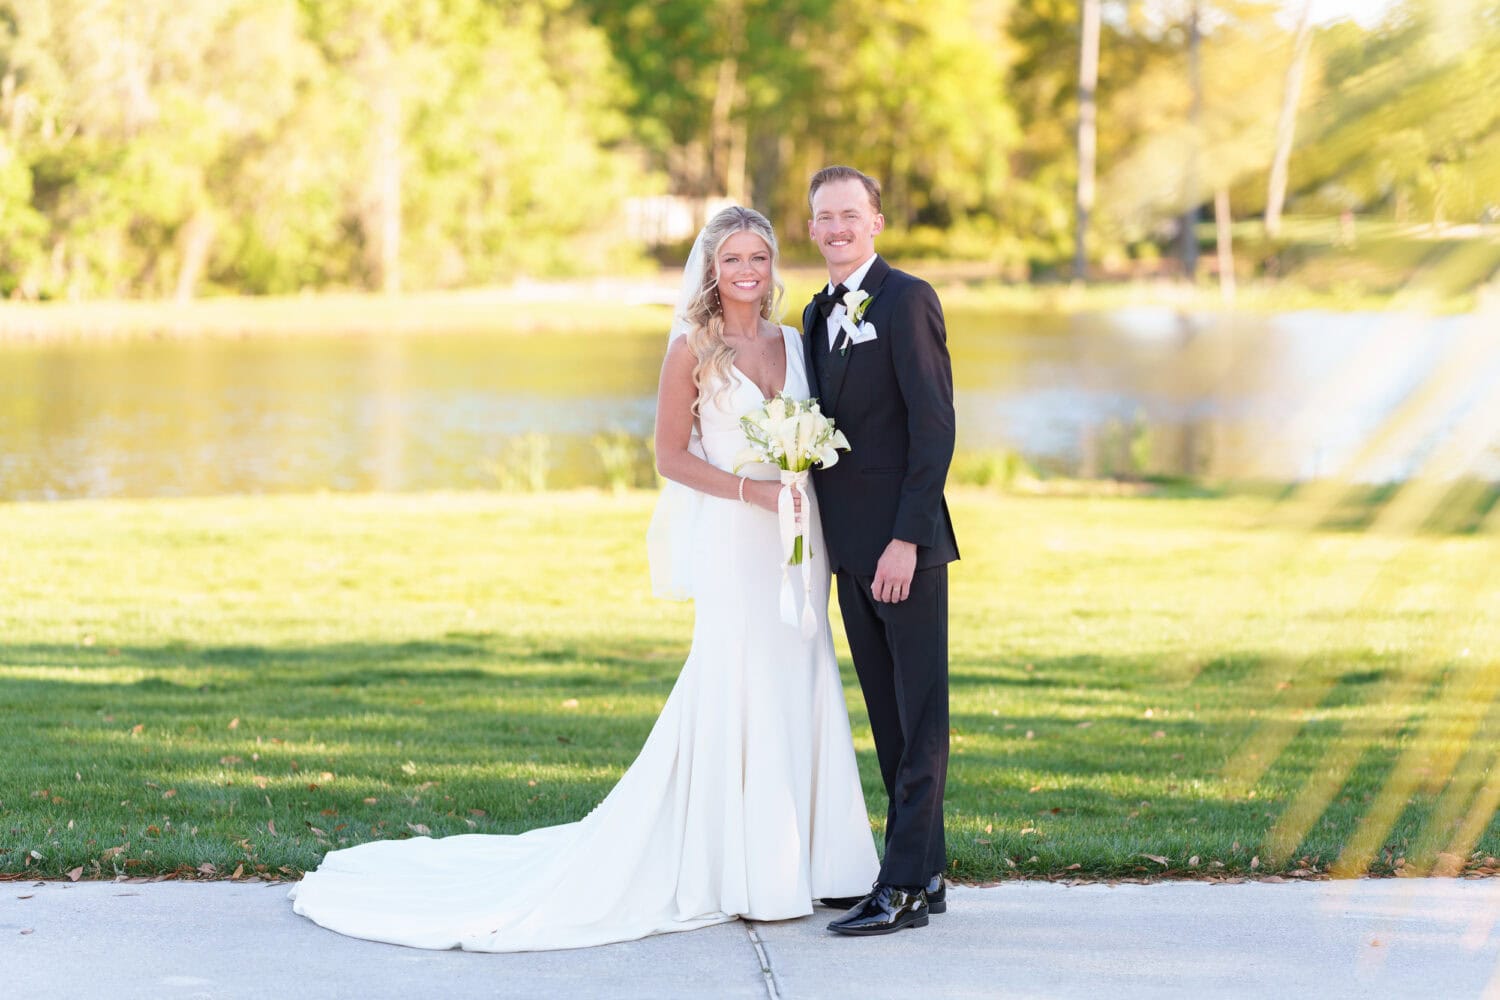 Find a shady spot for a few pictures after the ceremony - Pawleys Plantation